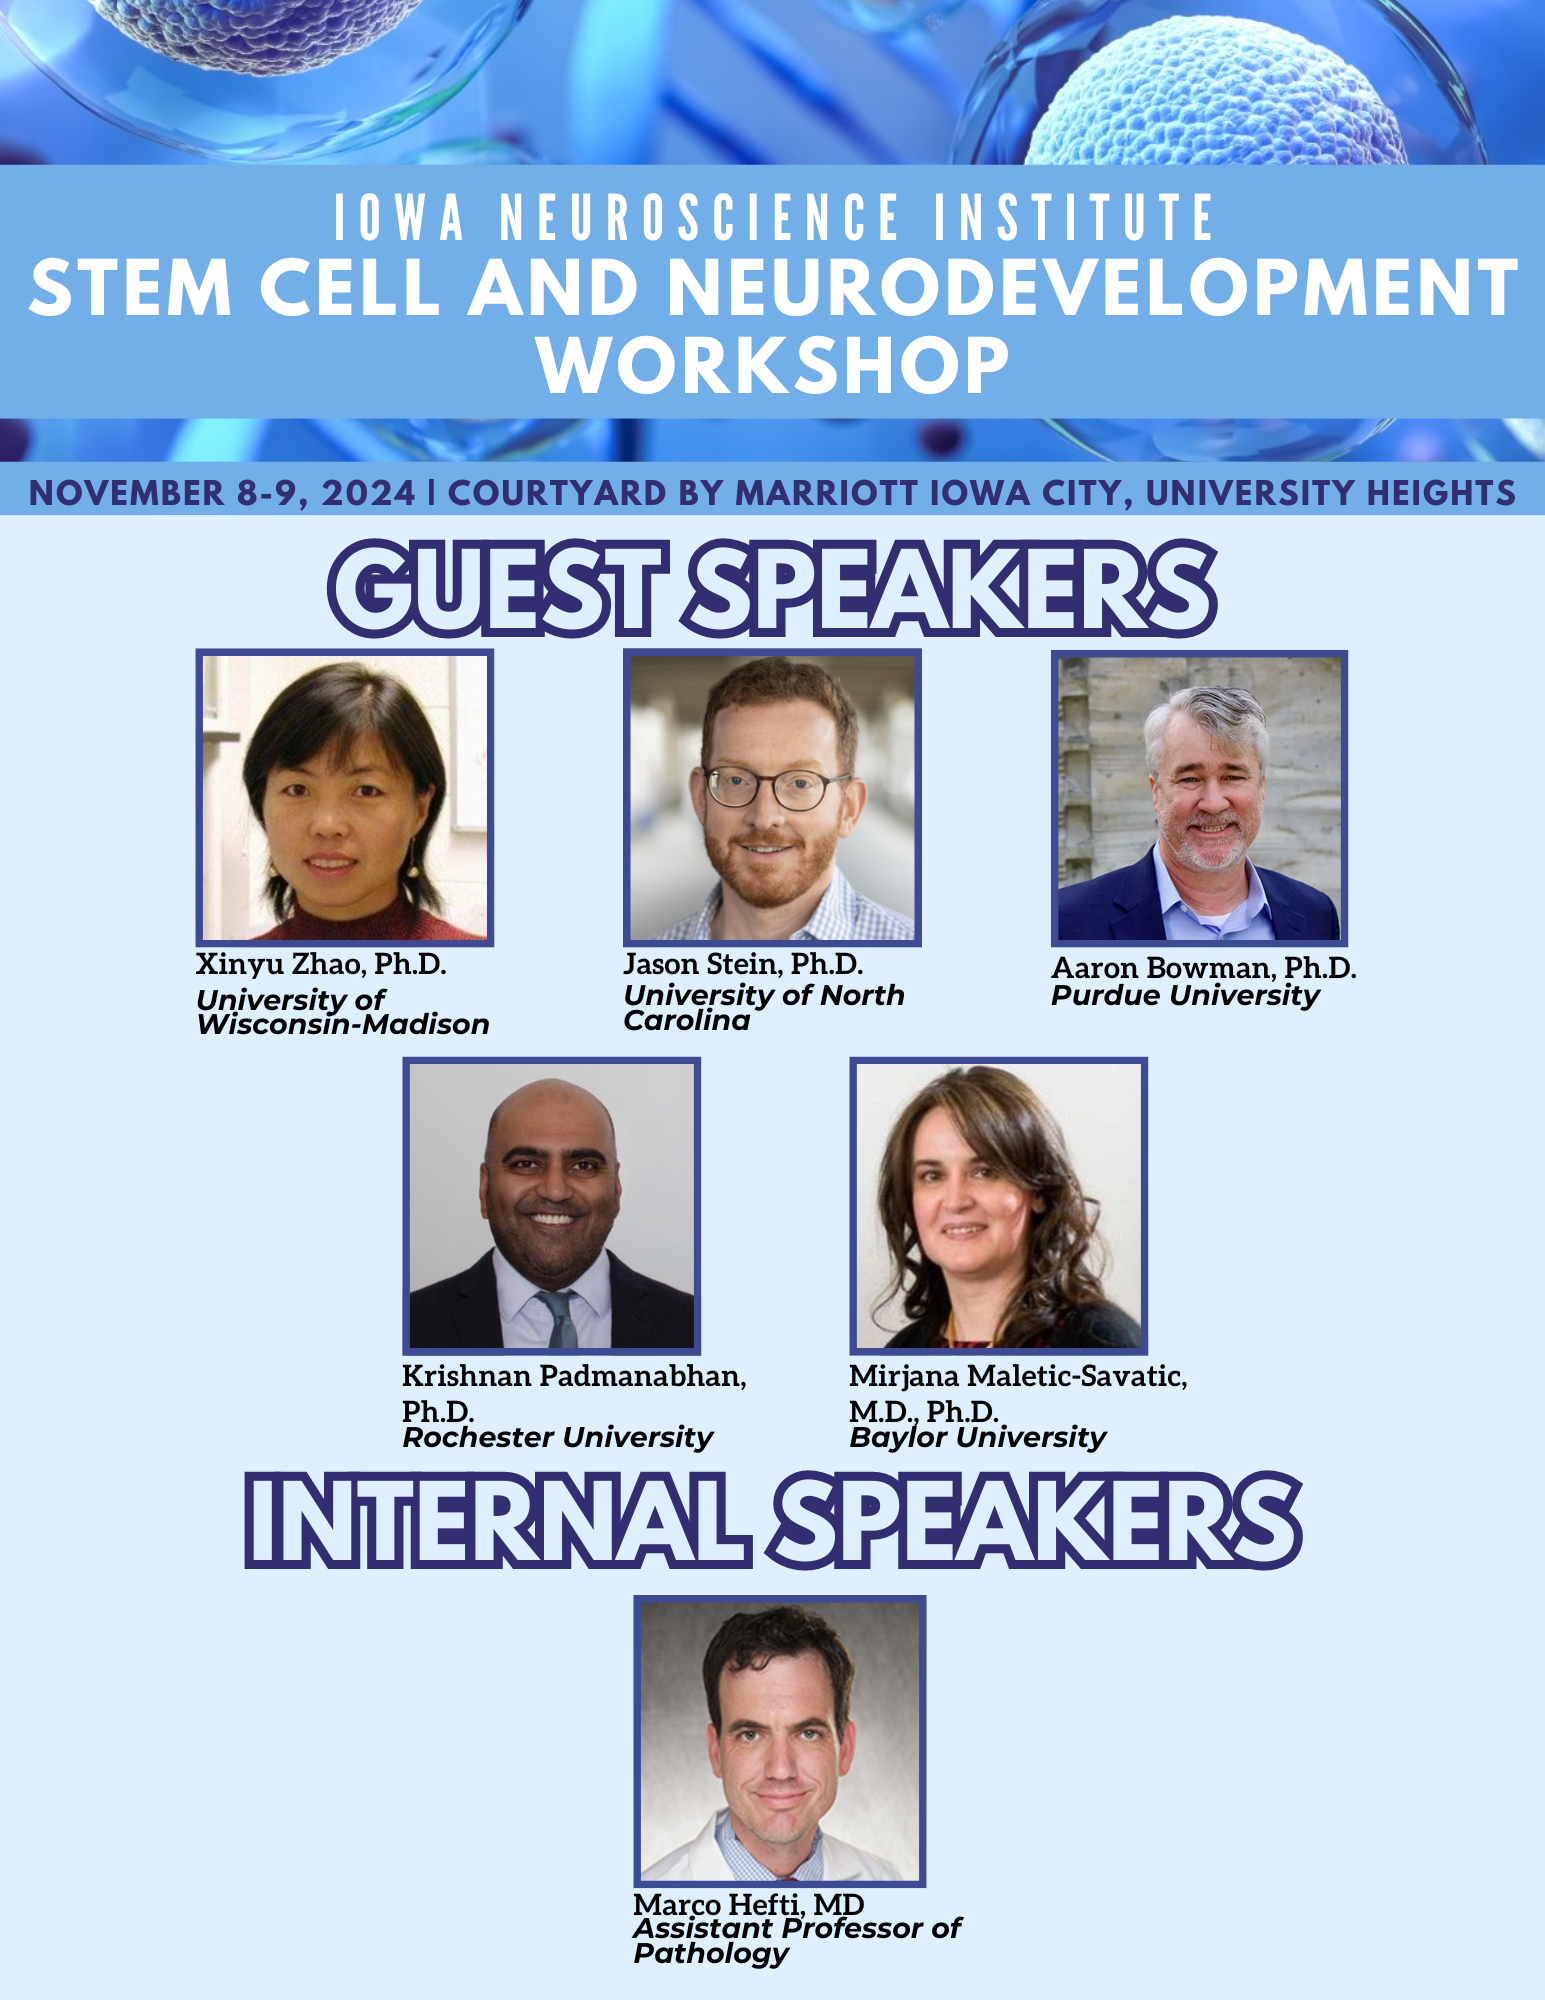 Stem Cell and Neurodevelopment Workshop Guest Speakers